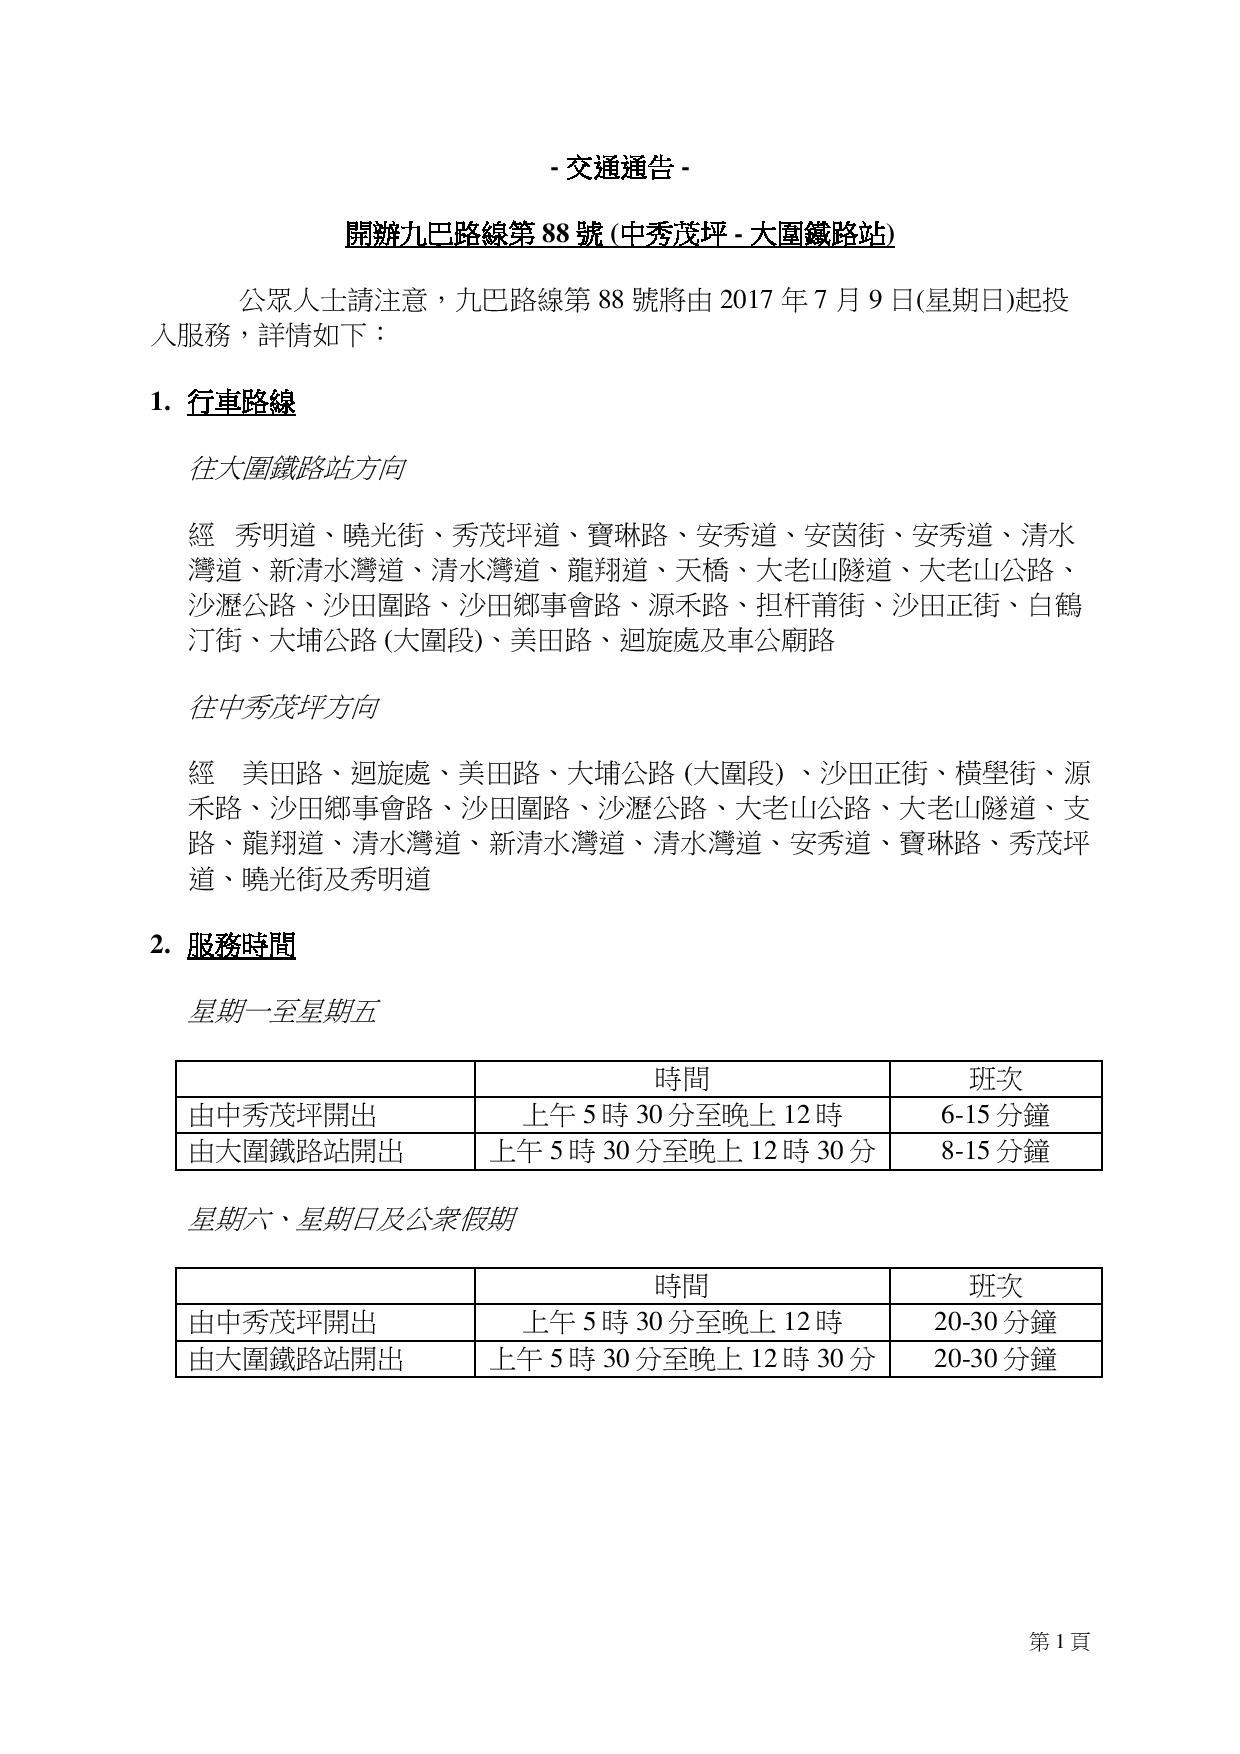 2017-07-05 kmb 88 introduction traffic advice chi-page-001.jpg